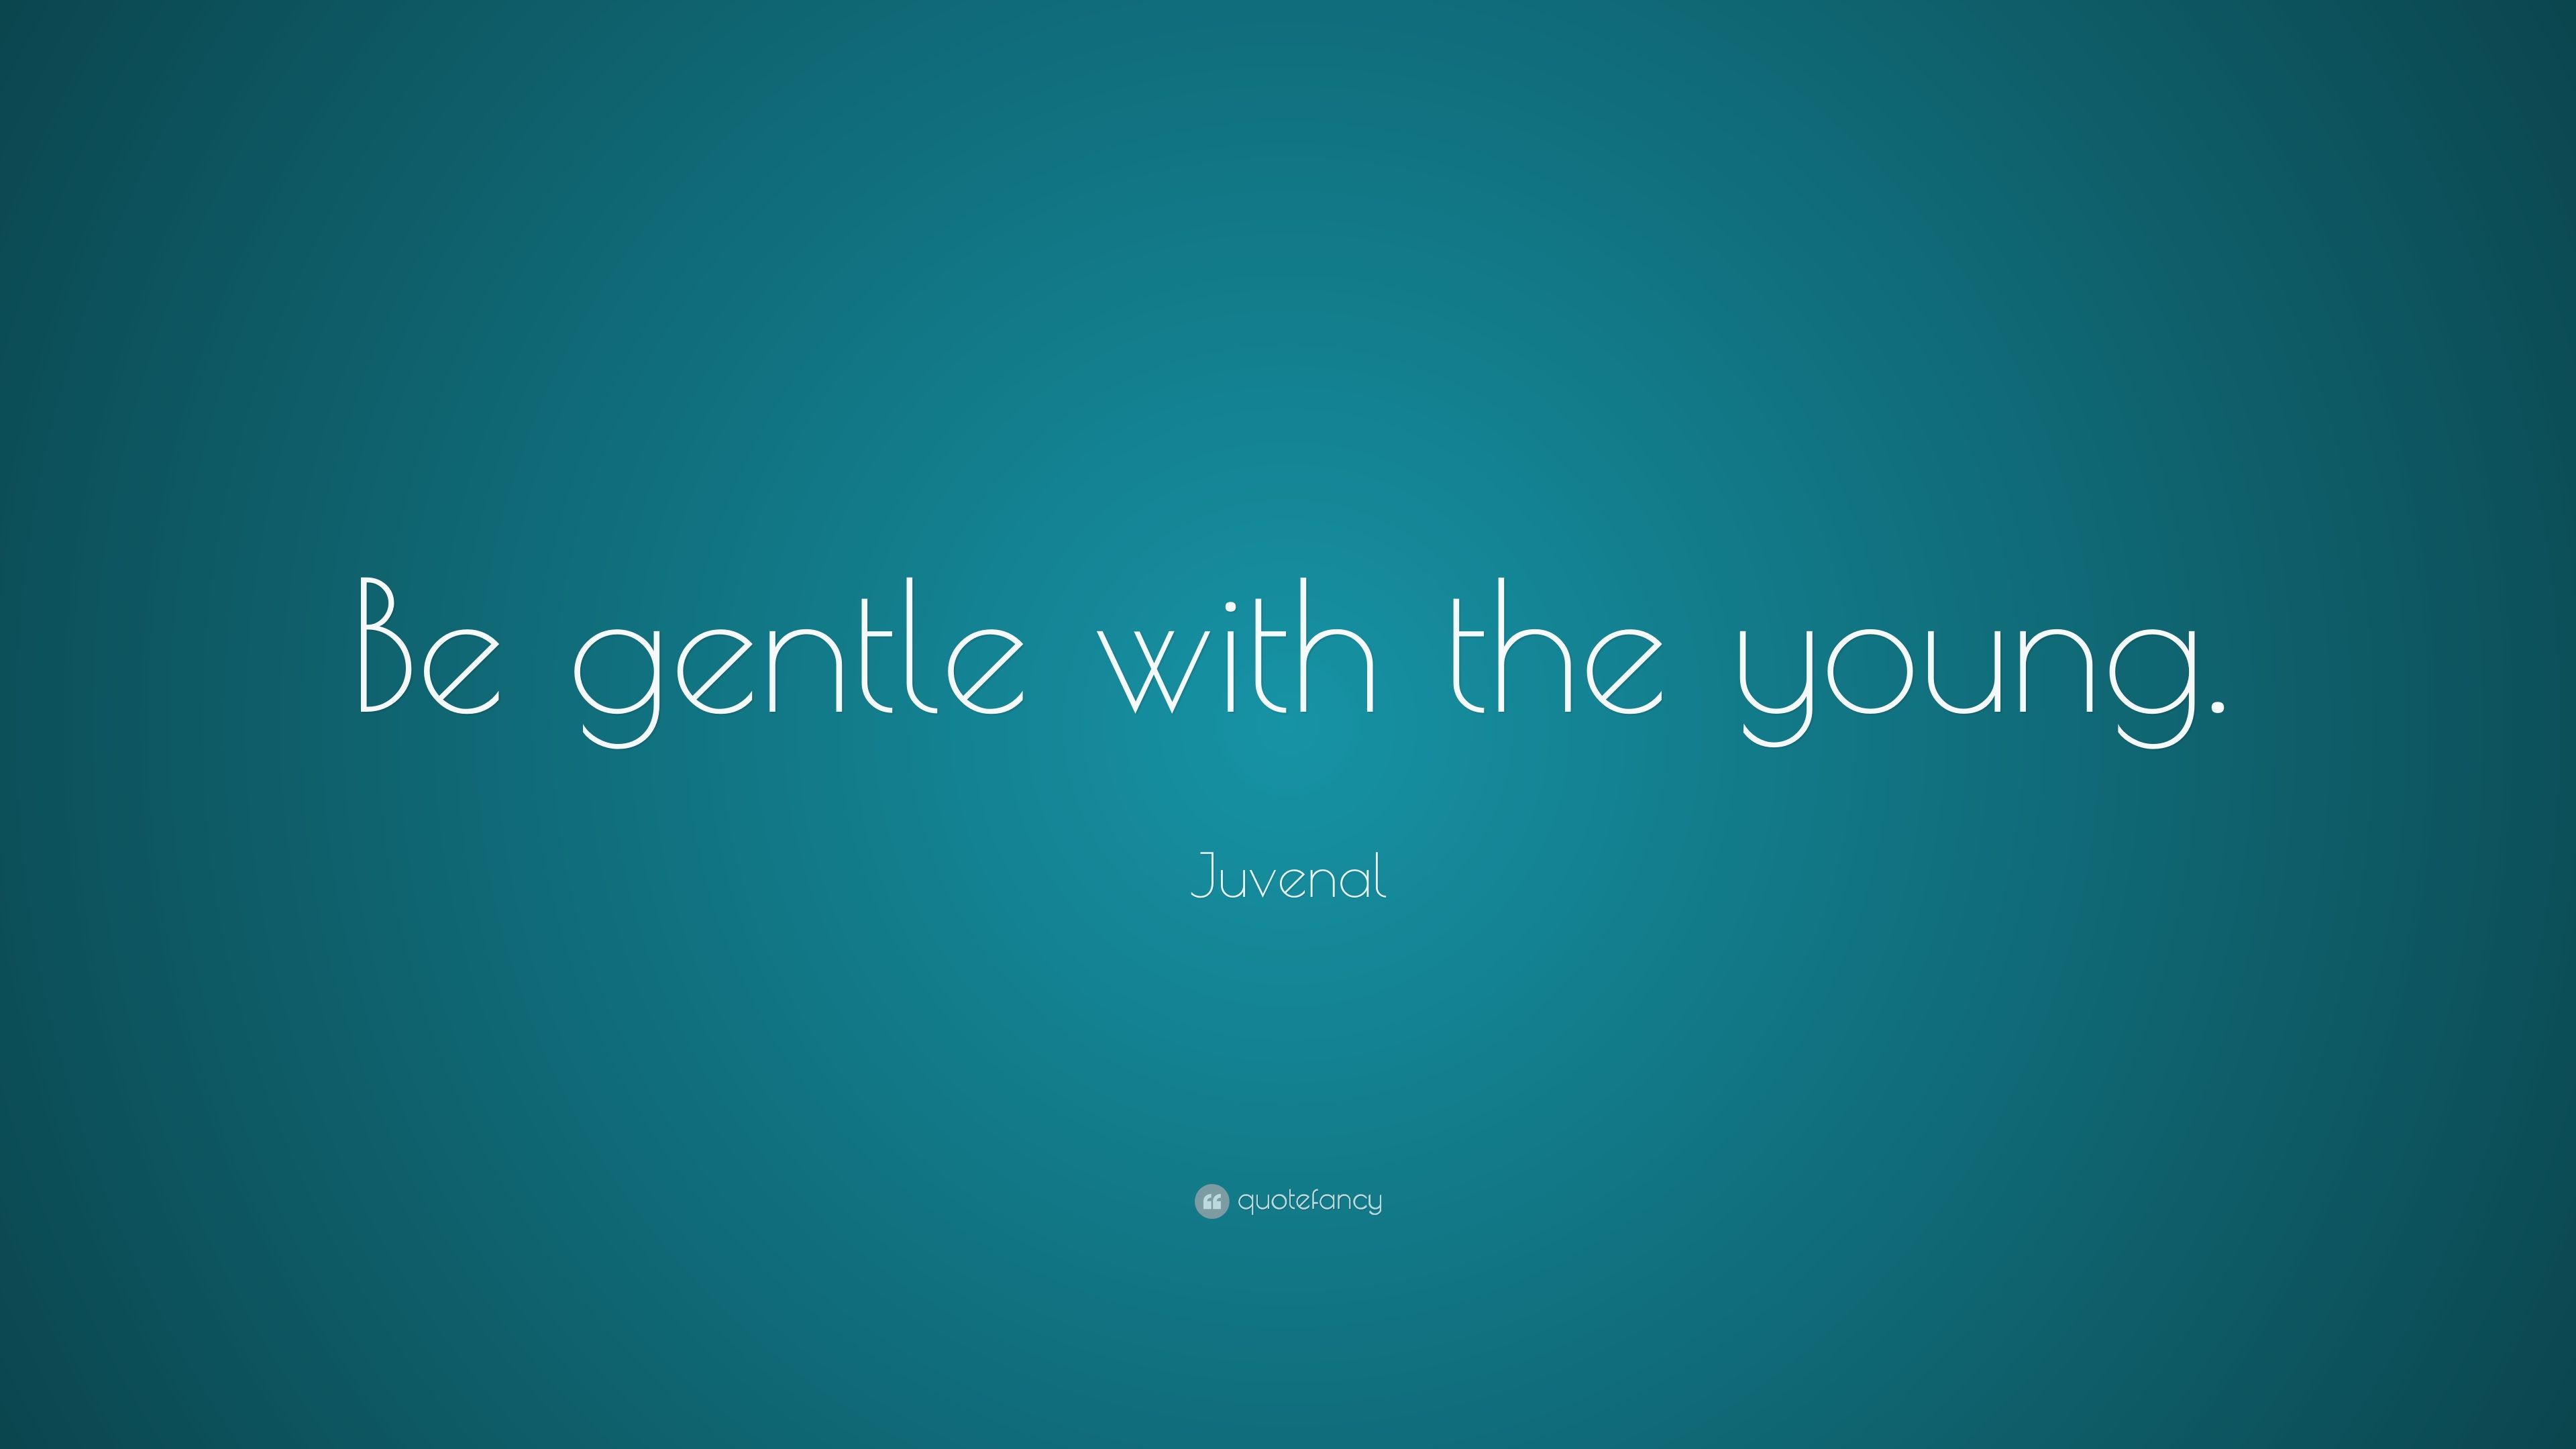 Juvenal Quote: “Be gentle with the young.” (7 wallpaper)